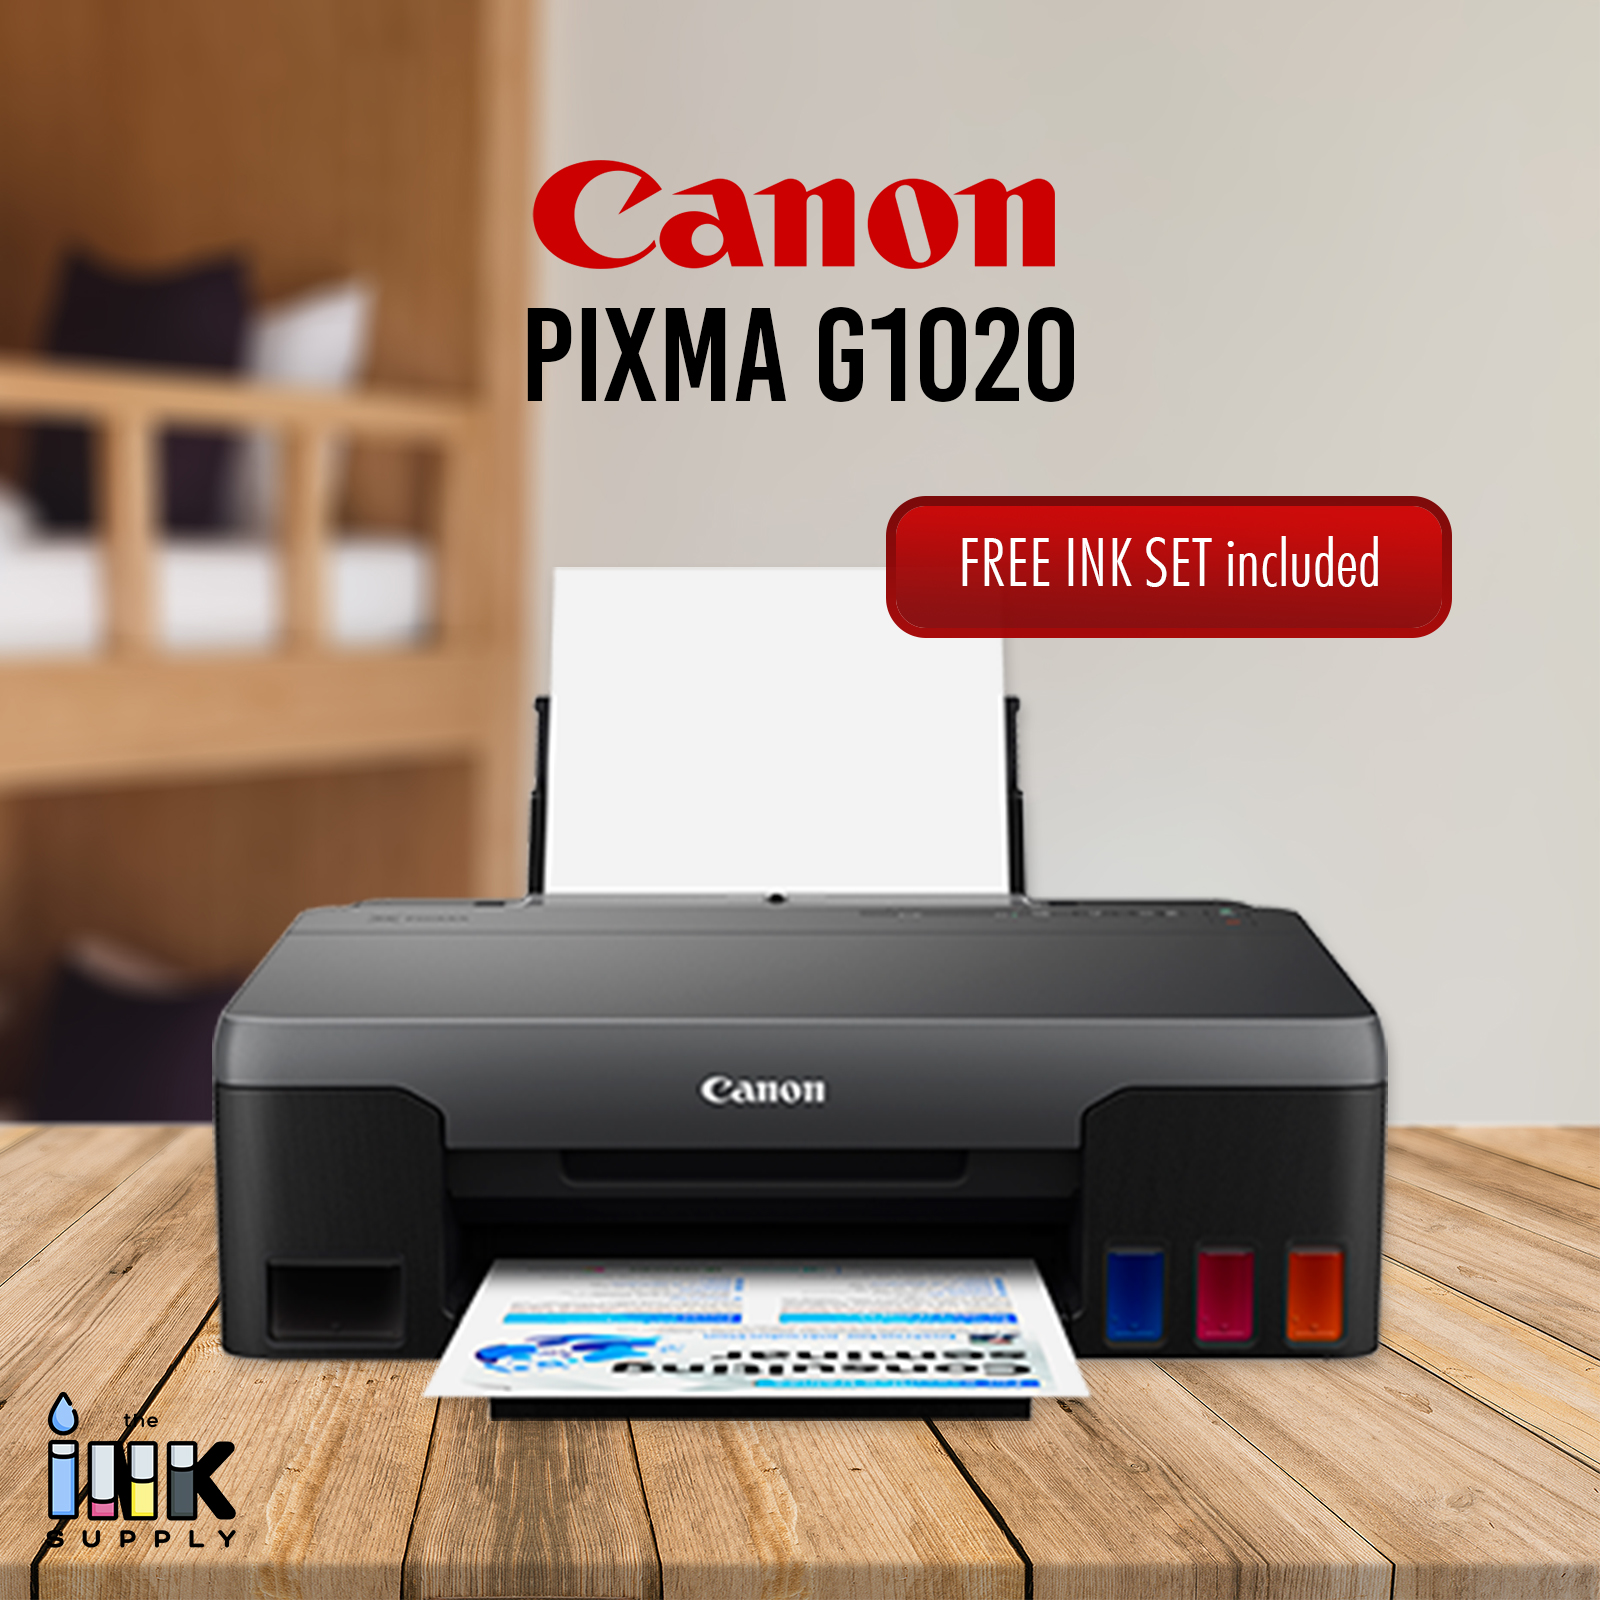 Canon Pixma G1020 Printer With Free Ink Low Cost Affordable Continuous Ink Refill Fast Cost 2883